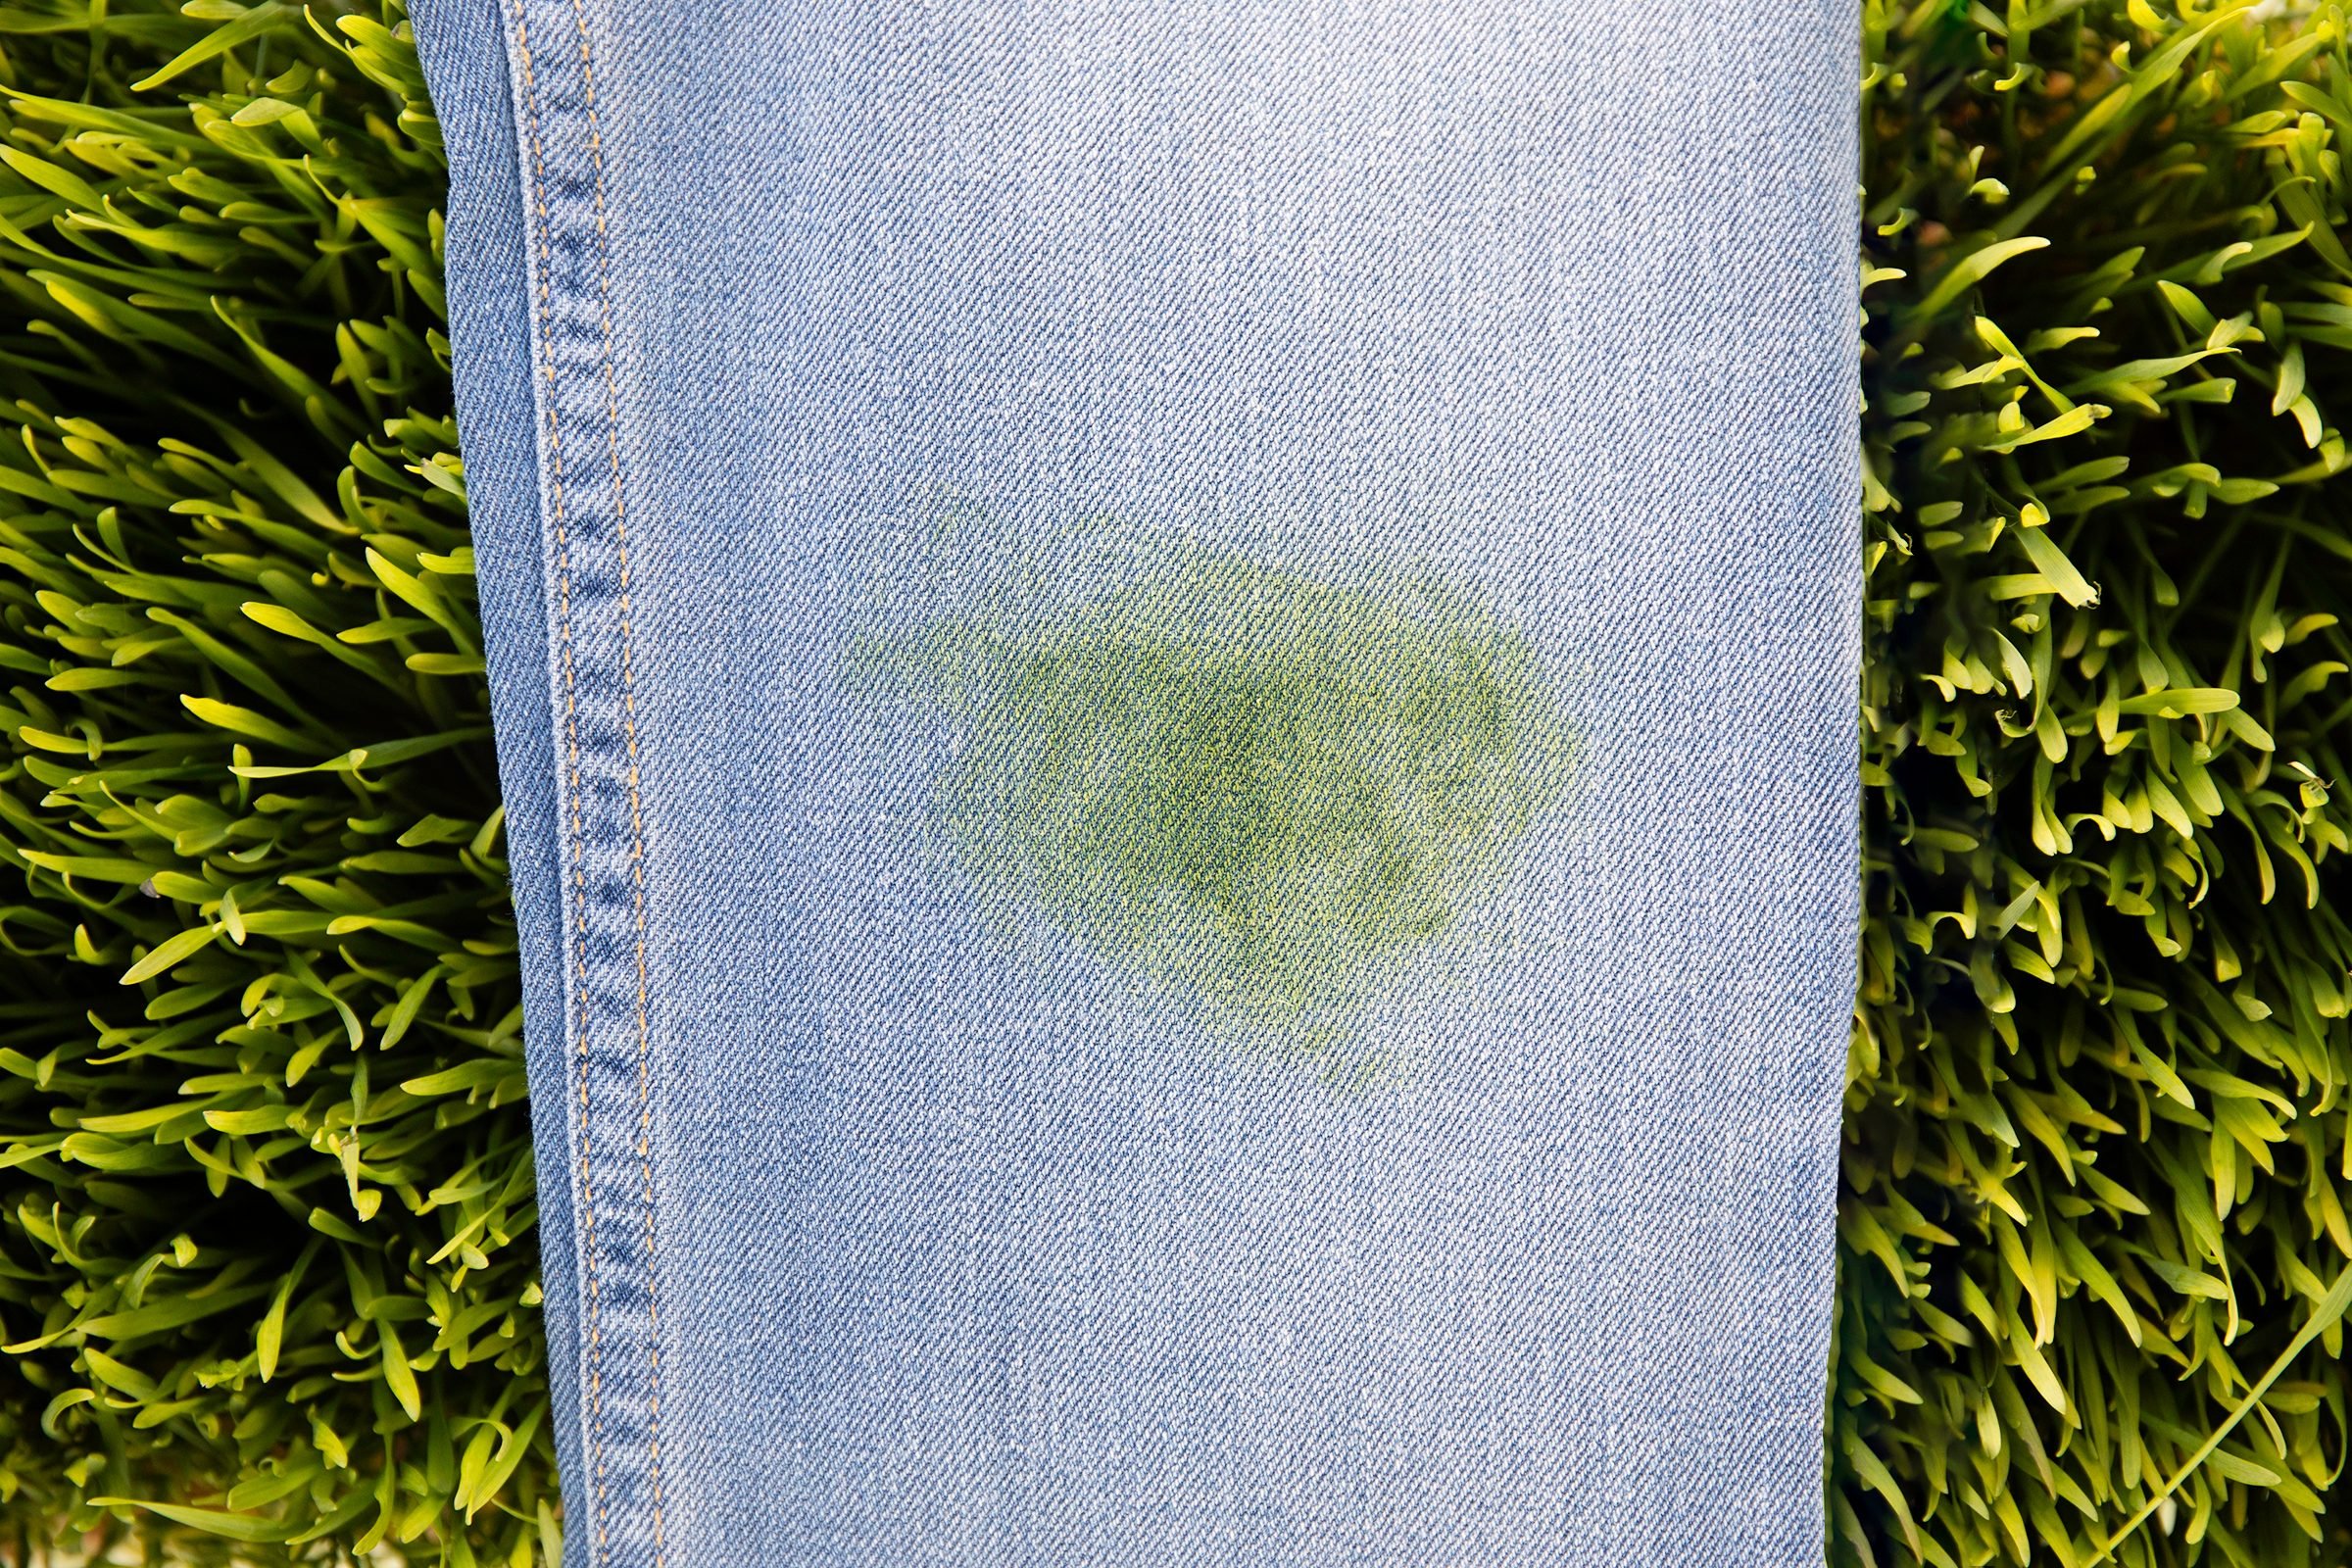 how-to-remove-grass-stains-how-to-get-grass-stains-out-of-jeans